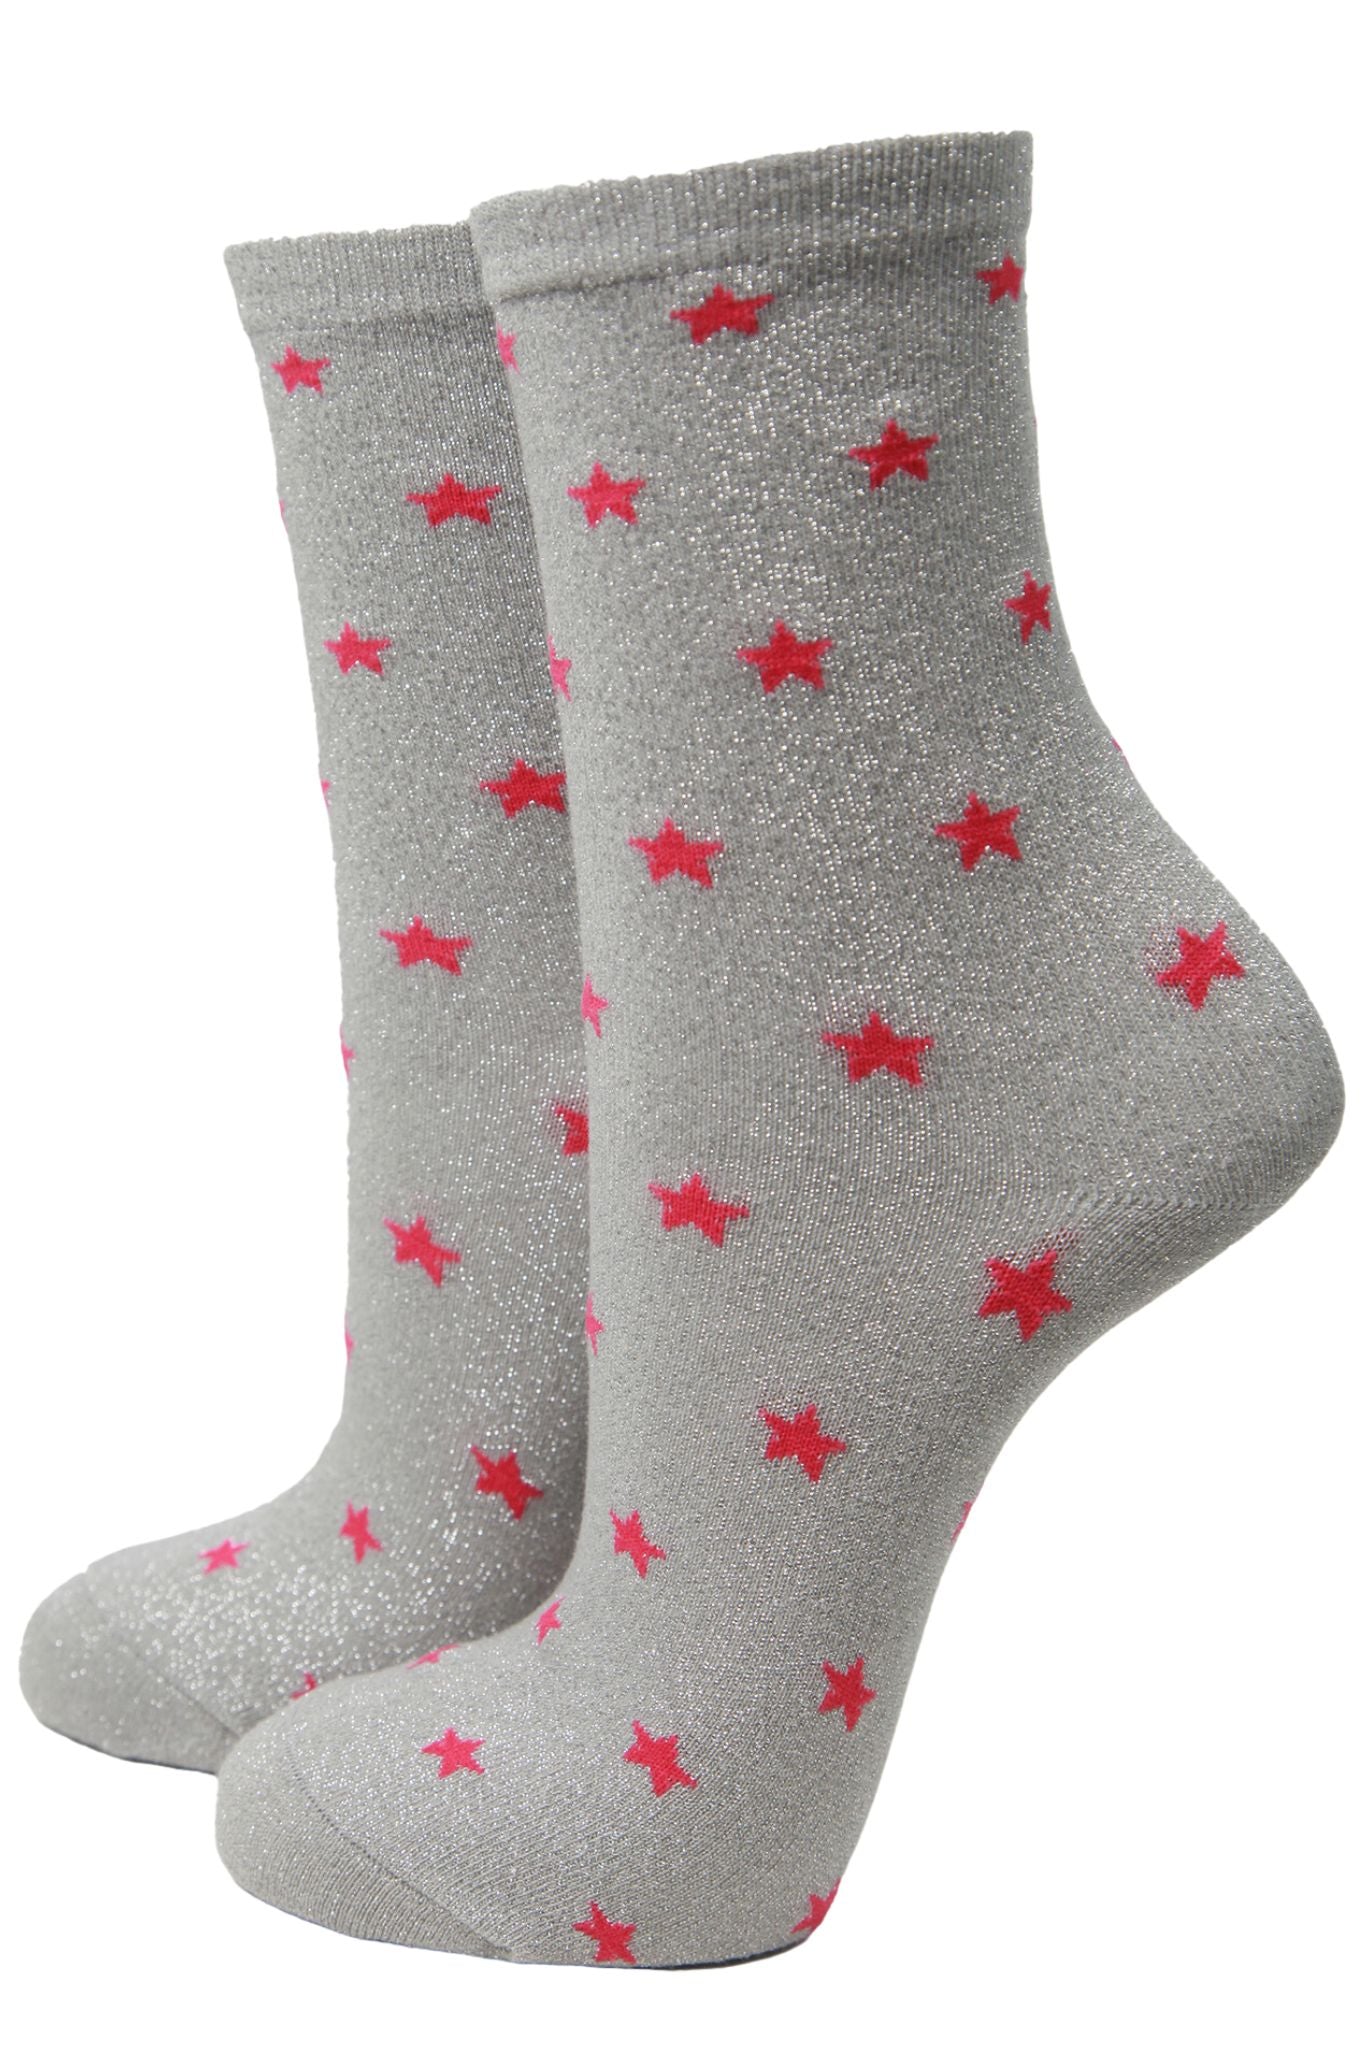 grey glitter ankle socks with an all over shimmer and pink star pattern